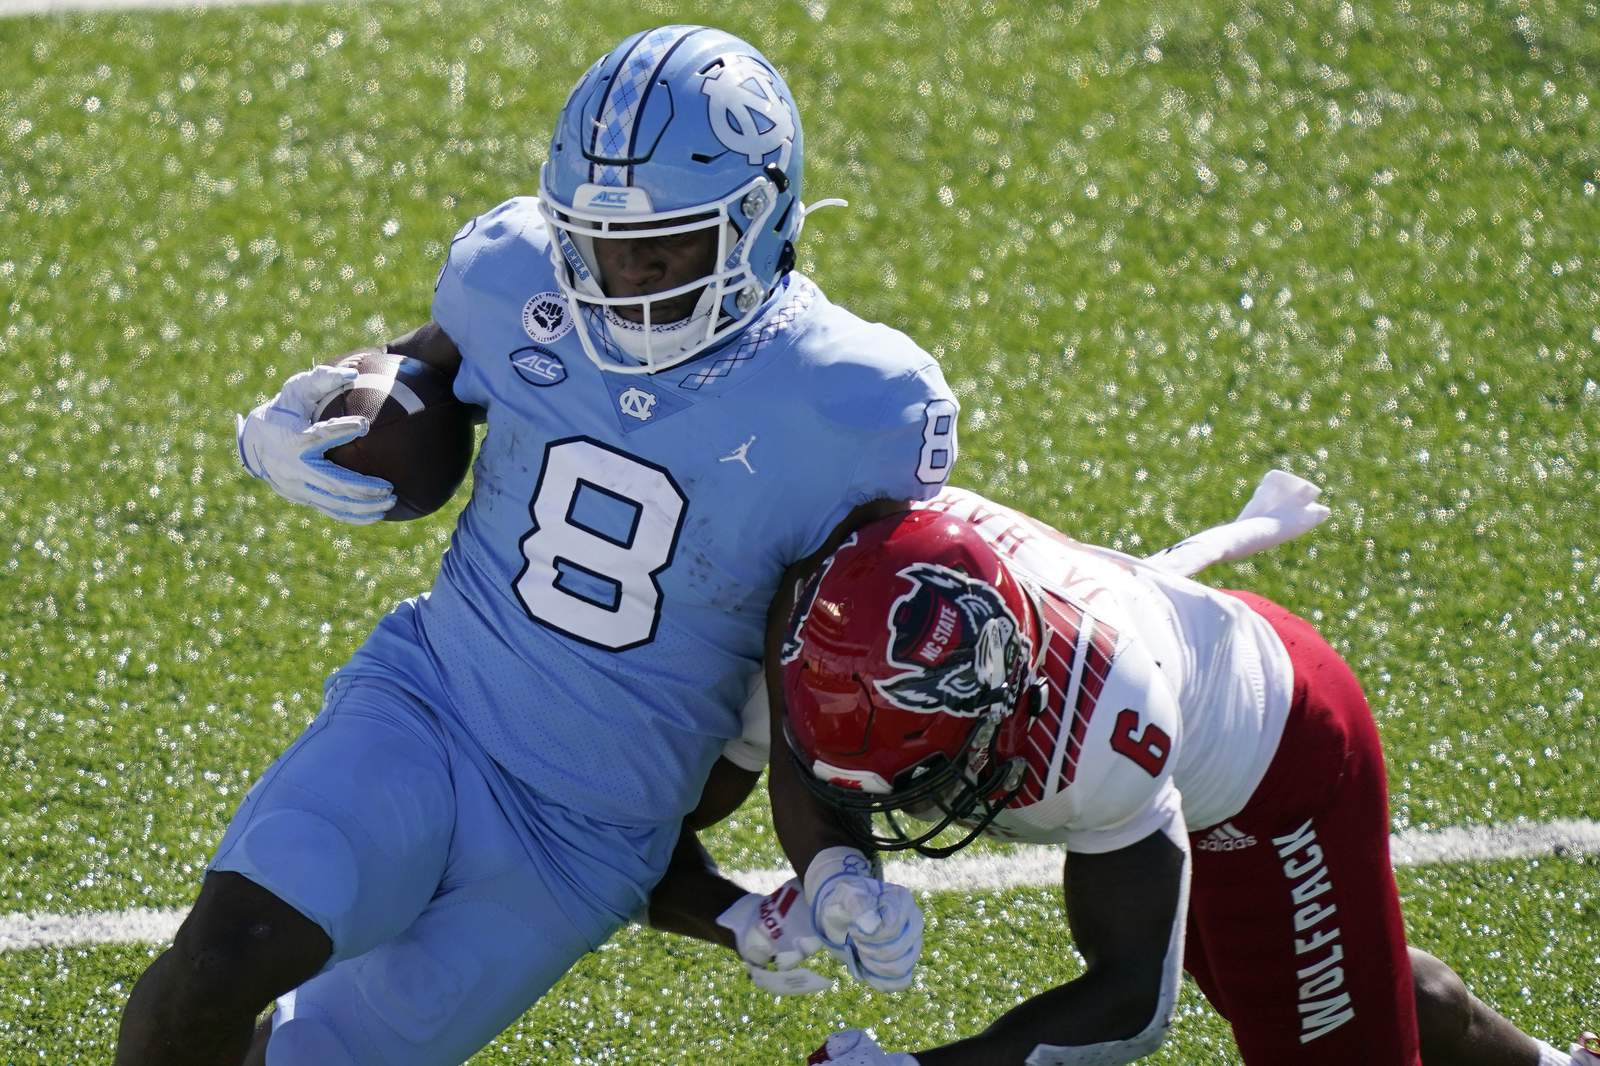 Williams, Carter lead No. 14 UNC past No. 23 NC State 48-21